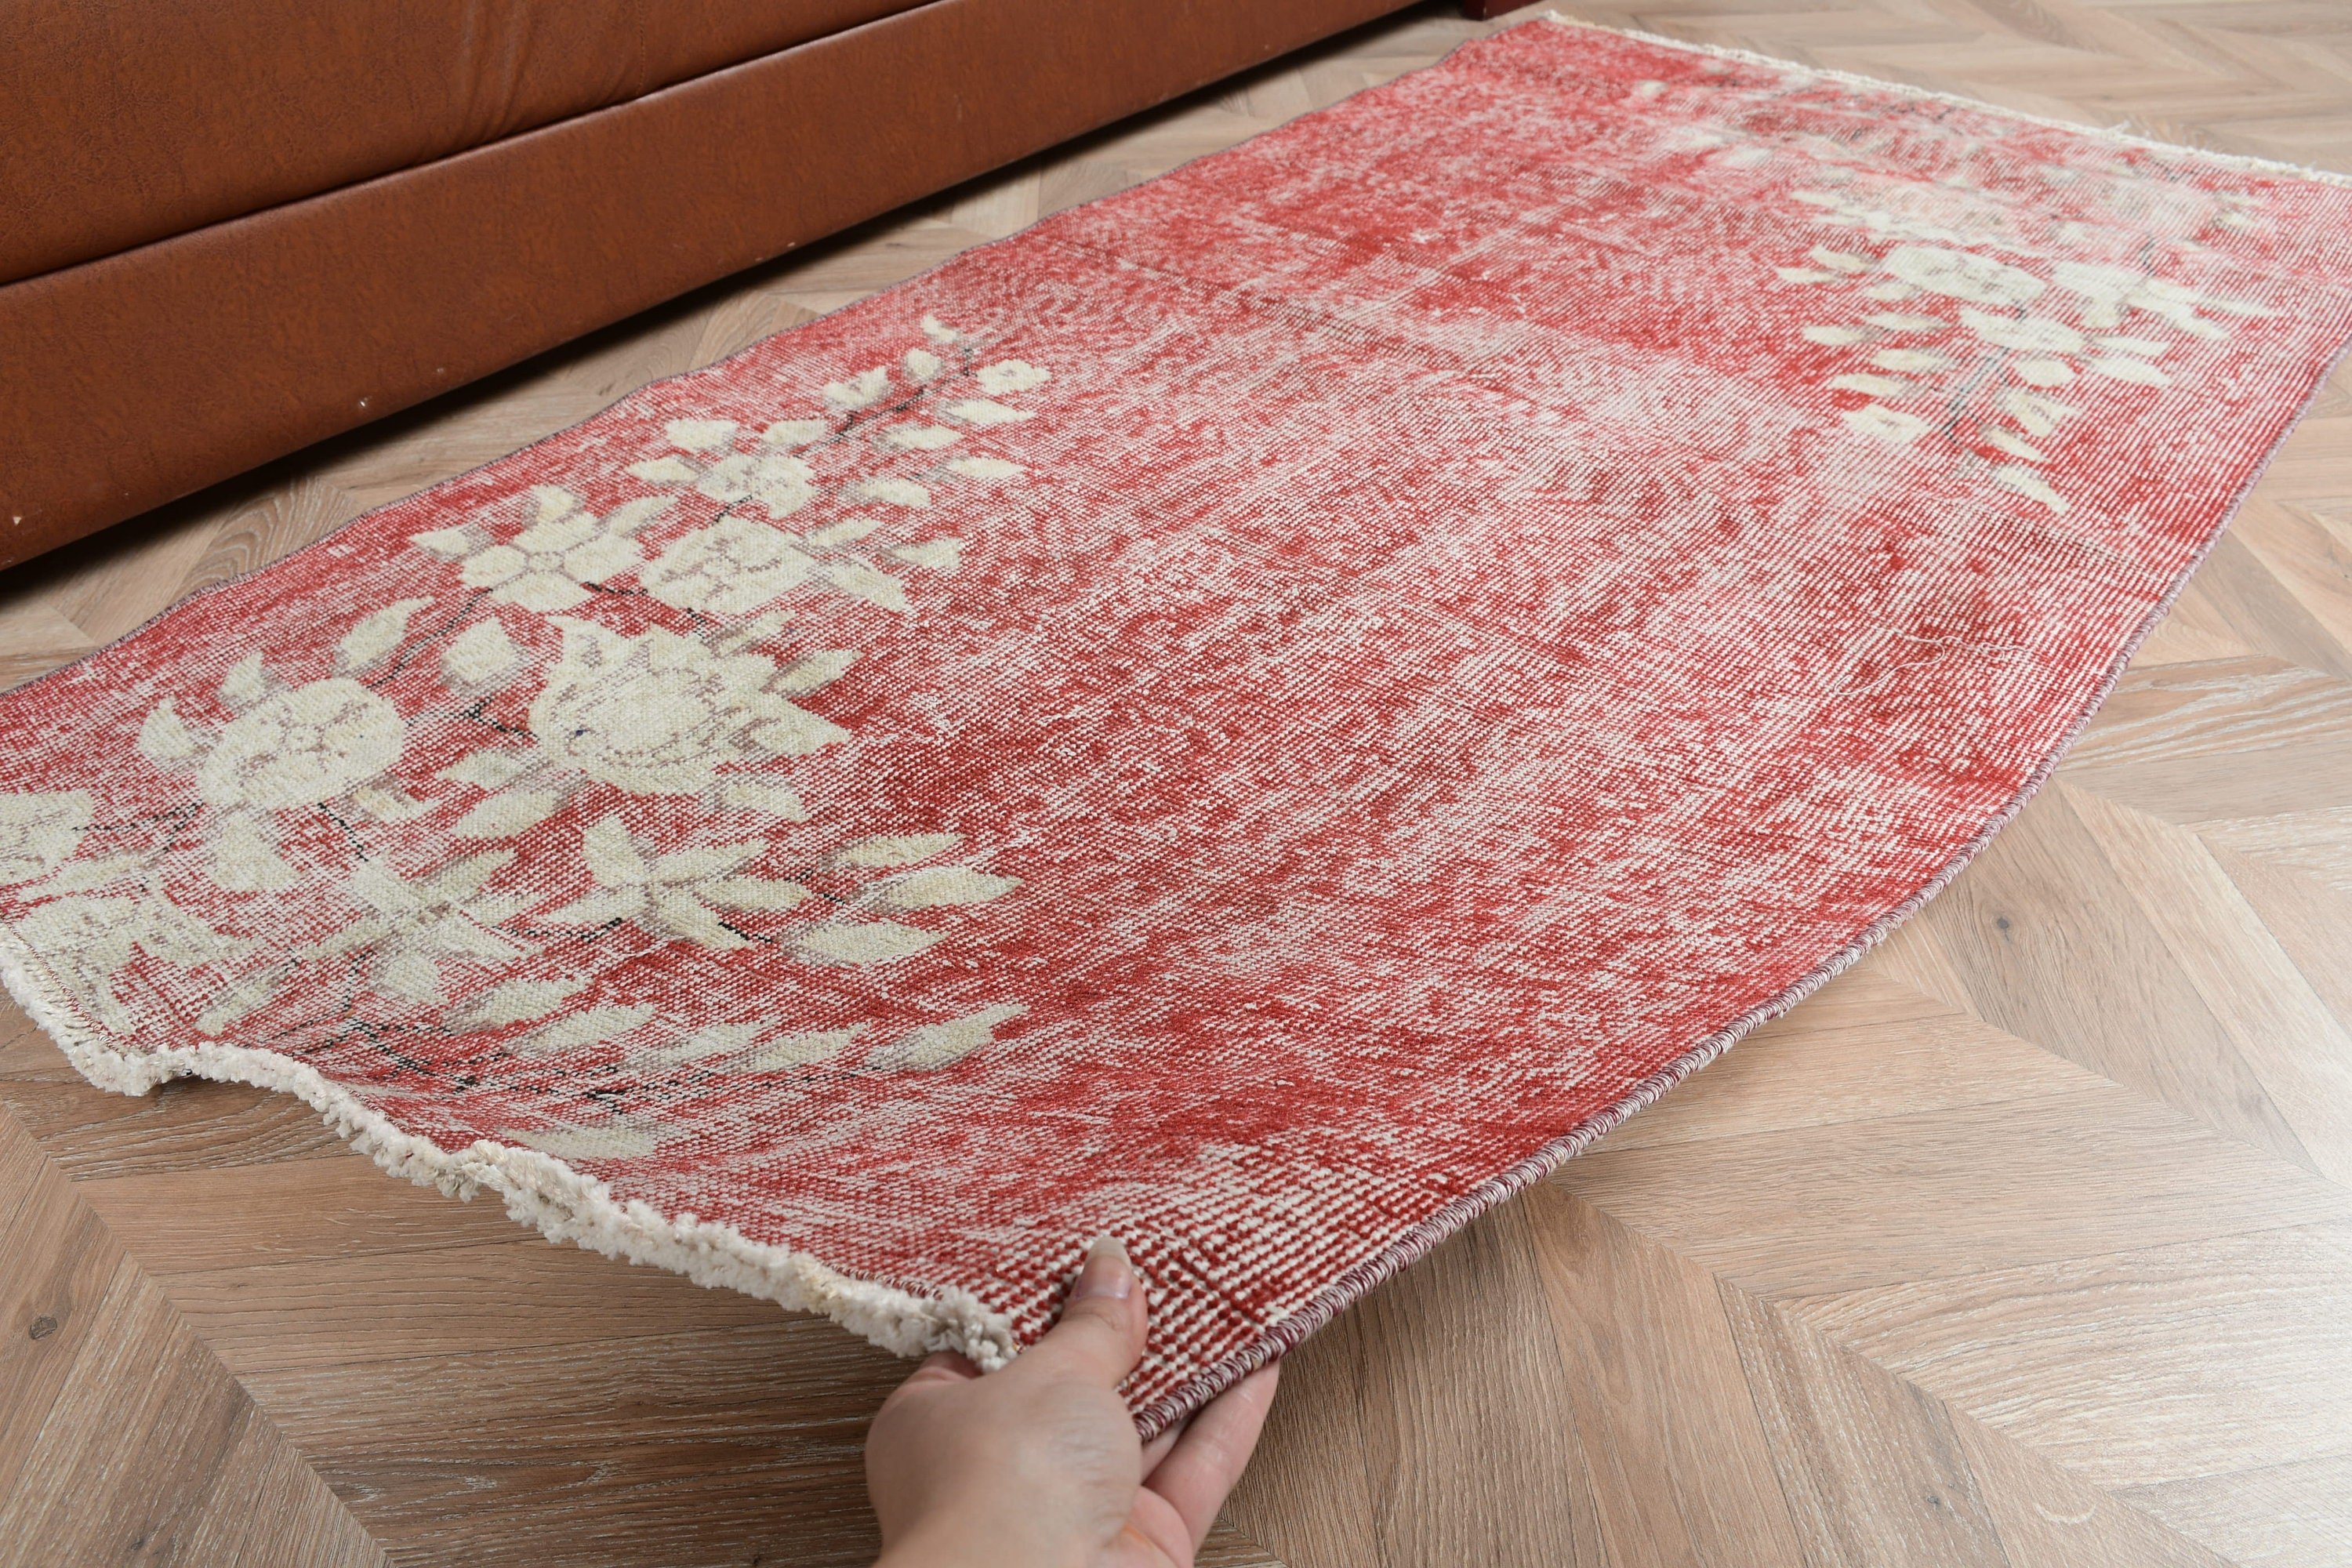 3.1x5.8 ft Accent Rugs, Home Decor Rug, Turkish Rug, Cool Rugs, Vintage Rug, Bohemian Rug, Bedroom Rug, Kitchen Rug, Red Anatolian Rugs